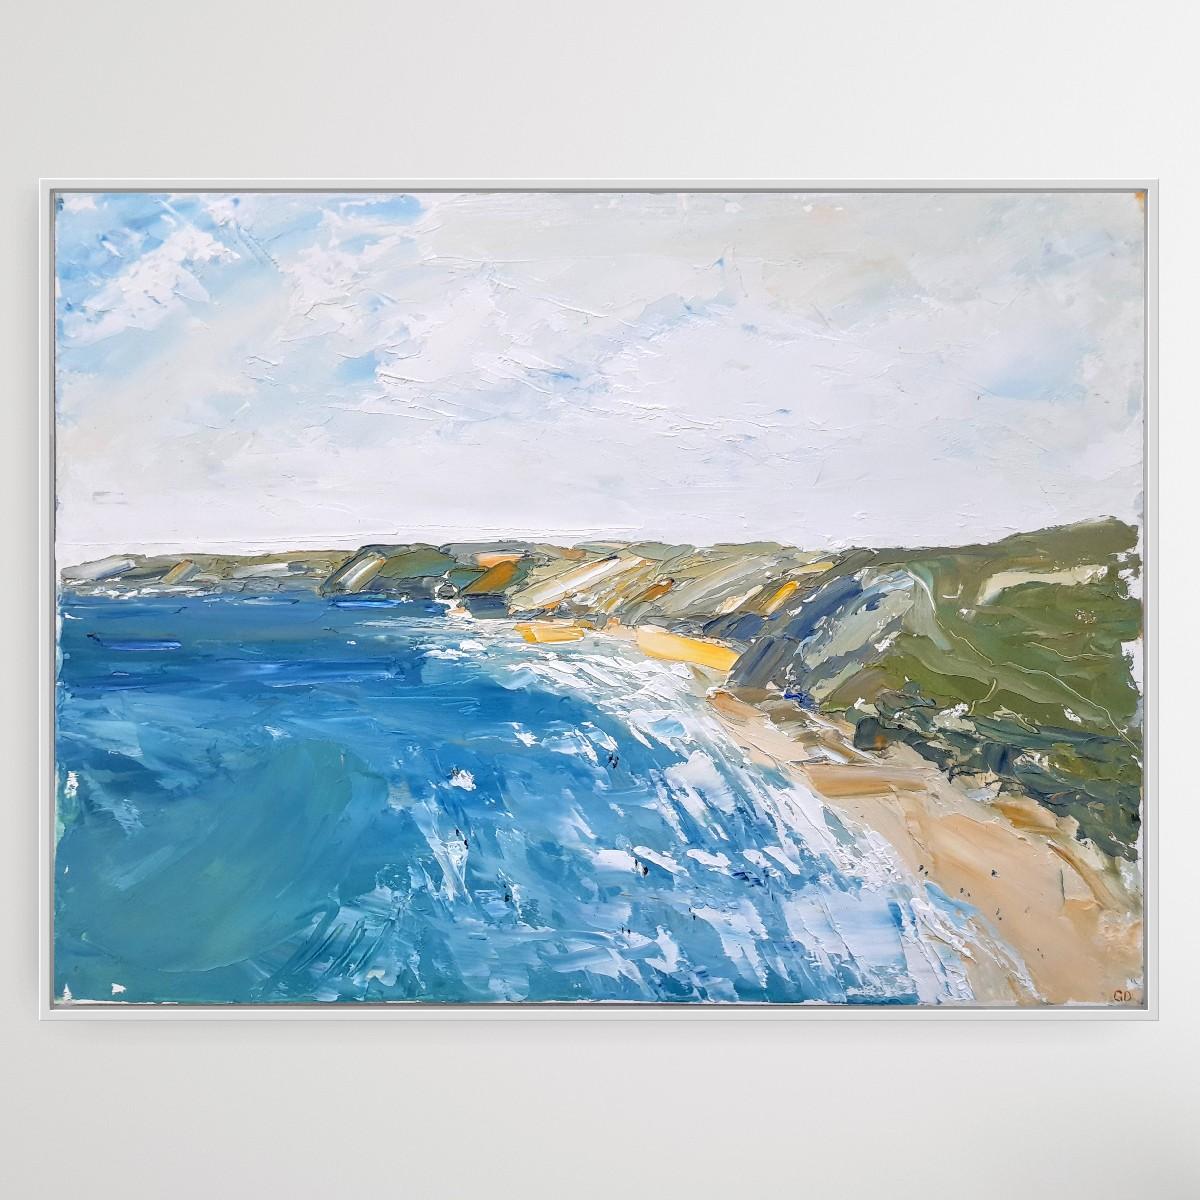 A Breezy Day at Perranporth, Cornwall by Georgie Dowling, Coastal Art - Painting by Georgie Dowling 